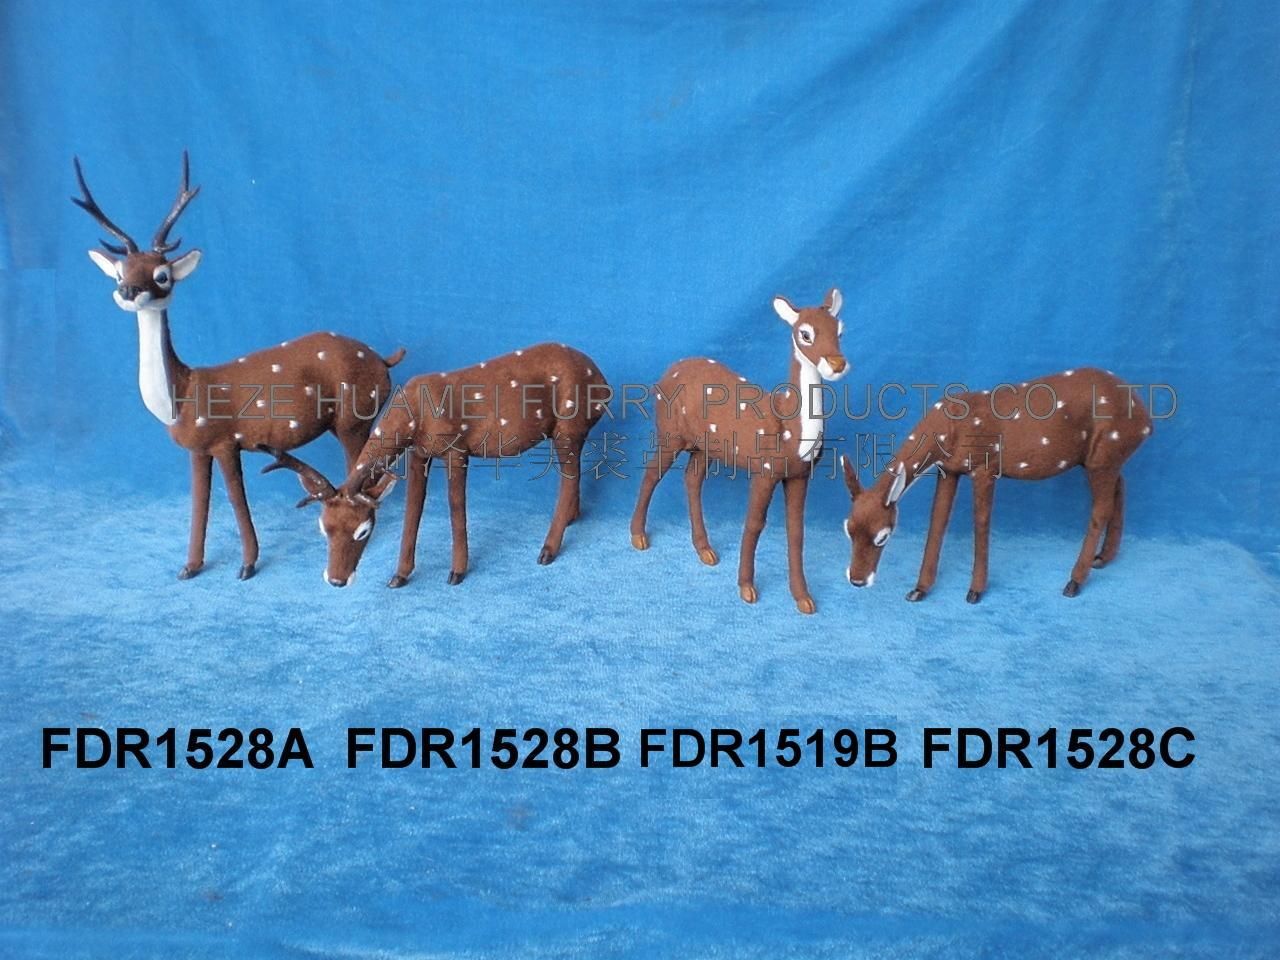 FDR1528,HEZE YUHANG FURRY PRODUCTS CO., LTD.